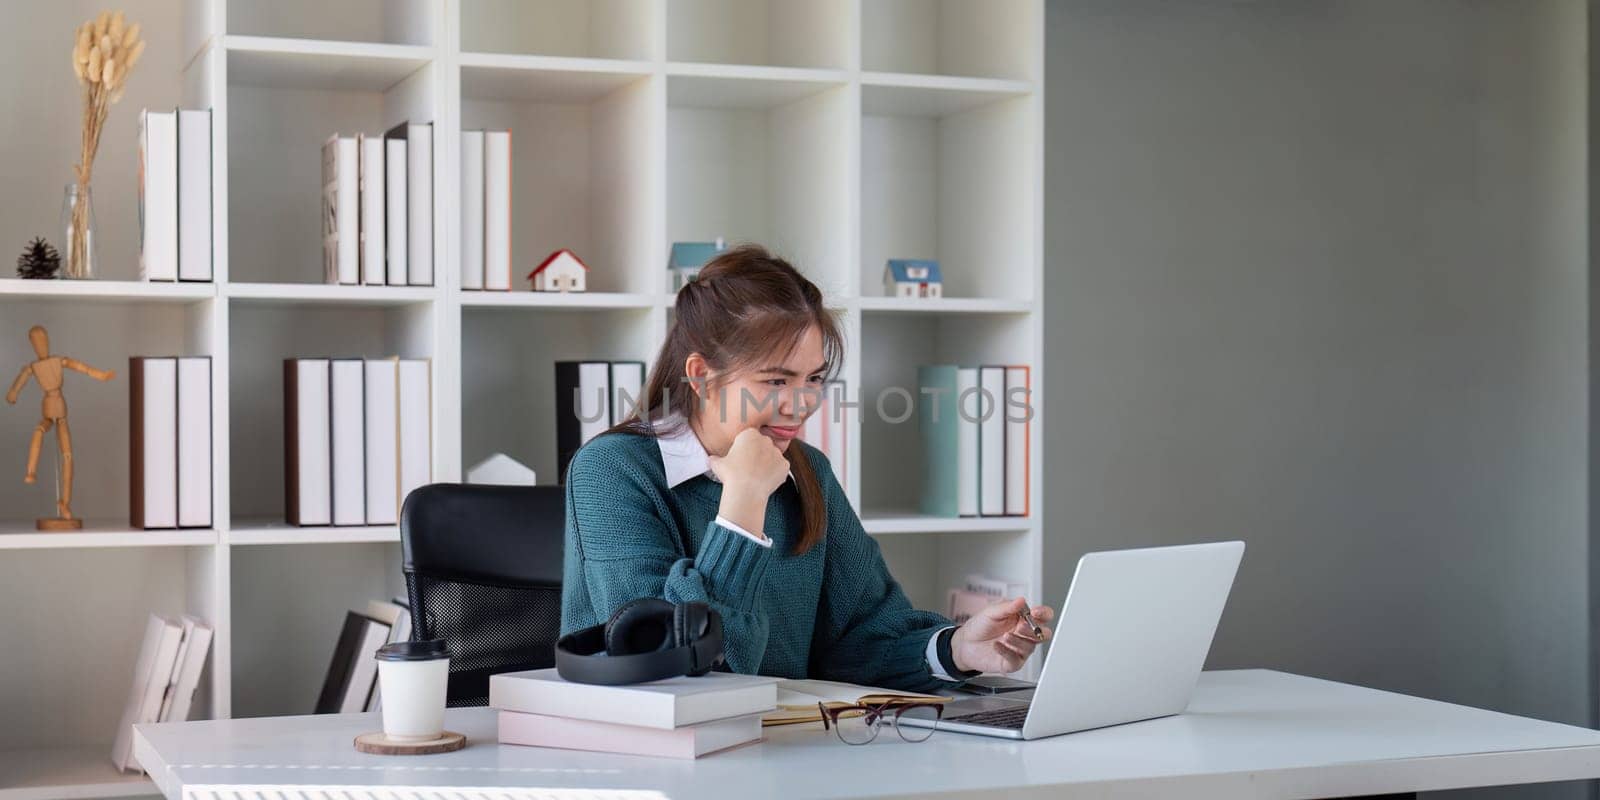 Young woman working on a laptop at a home office desk.